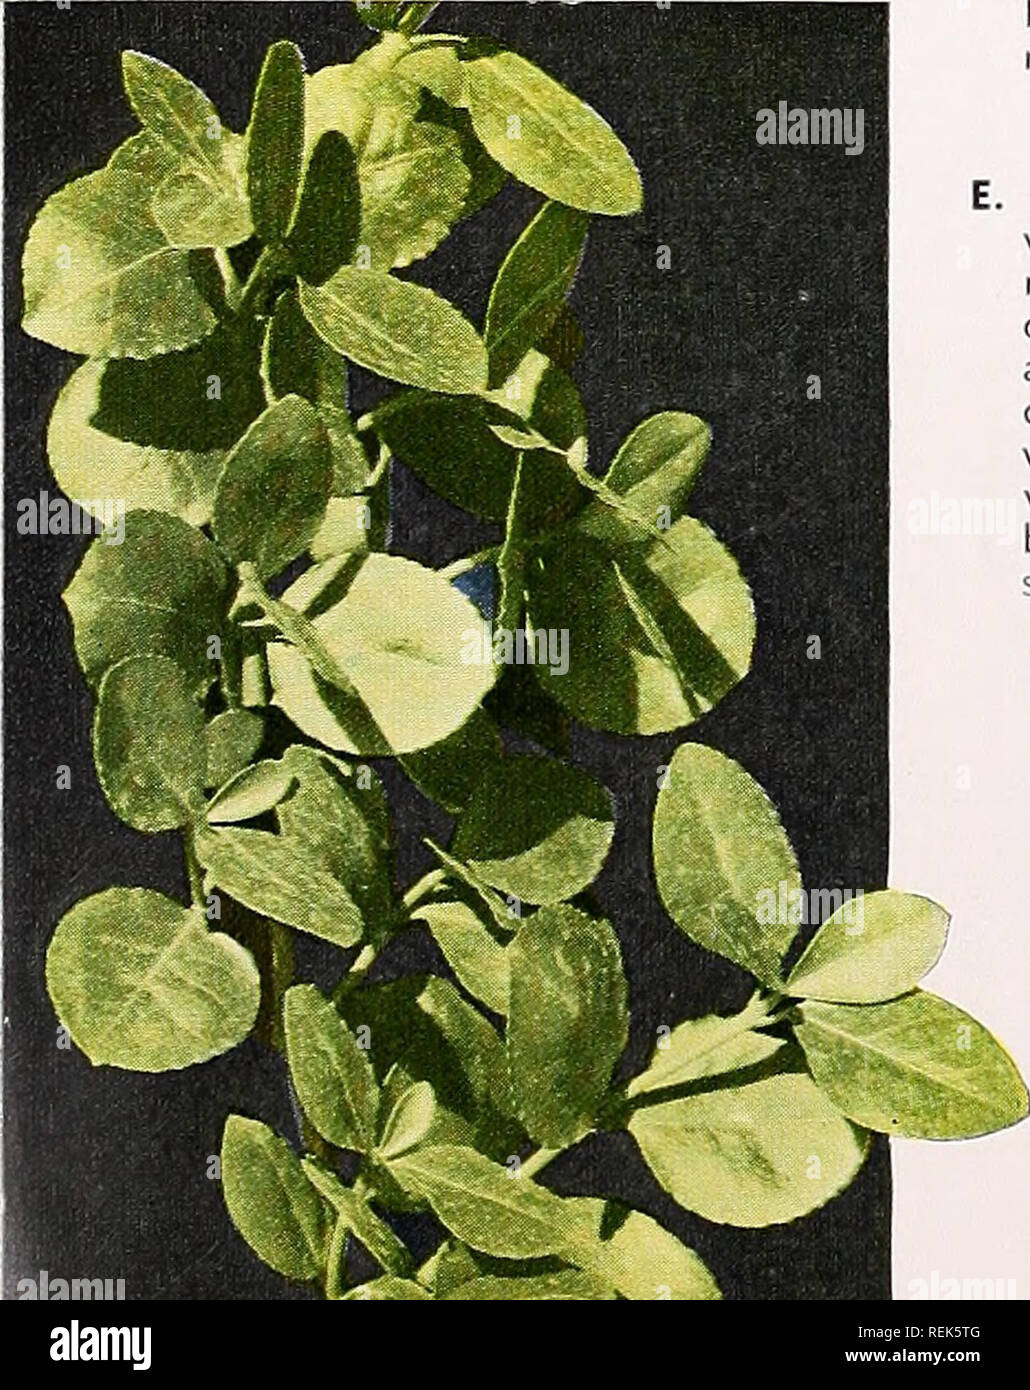 . C. M. Hobbs &amp; Sons. Nurseries Horticulture Catalogs; Evergreens Catalogs; Fruit trees Catalogs; Climbing plants Catalogs; Shrubs Catalogs; Vegetables Catalogs. Berberis Julianae. E. Newport. A plant similar to E. Patens with a smaller leaf and not as large a plant at maturity. radicans erectus. A plant of dark glossy green foliage of a bushy, compact nature excellent as a speci- men, in a foundation planting or as a hedge. This plant will often hold the foliage all winter. E. Sarcoxie. Glossy green leaves simi- lar to Vegetus but more of an up- right grower. vegetus. A very versatile pla Stock Photo